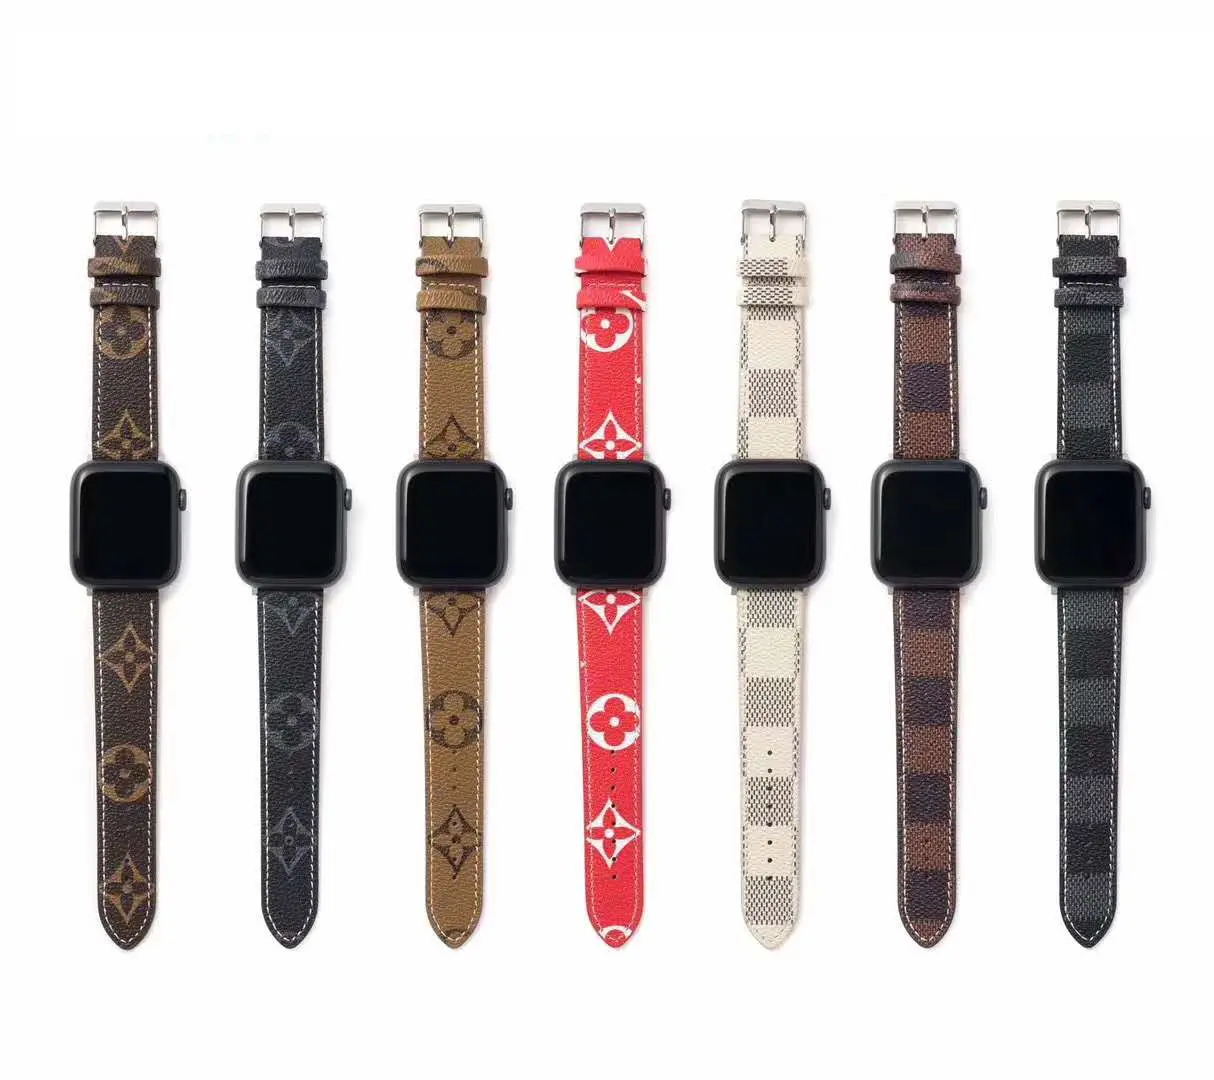 Luxury vintage brand watch band for Apple watch pu leather 38 40 42 44mm bee snake flower cat Band leather for iwatch band